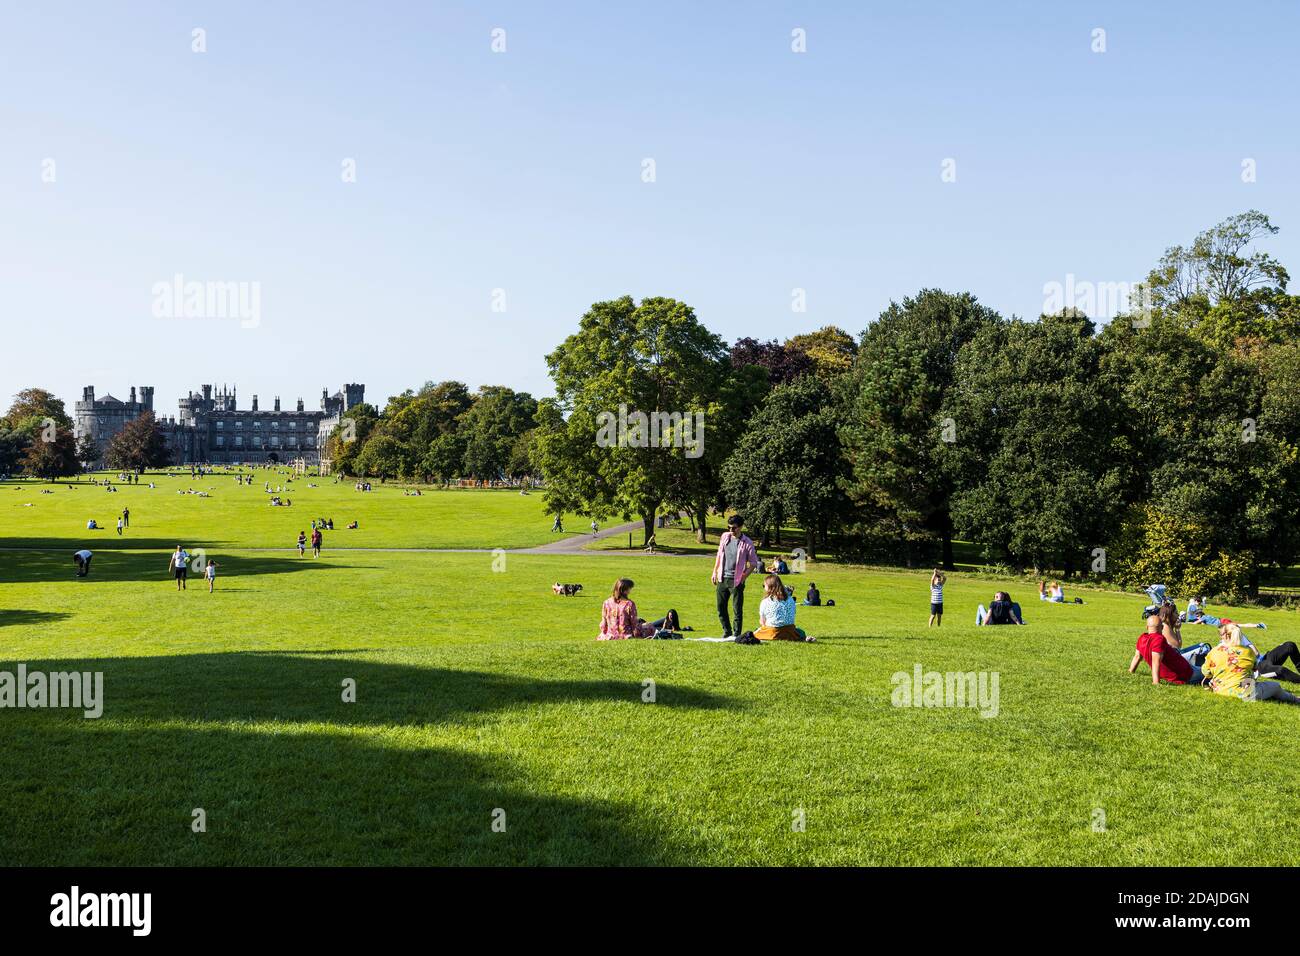 People enjoying the sunny weather on the grass in the grounds of Kilkenny castle, County Kilkenny, Ireland Stock Photo